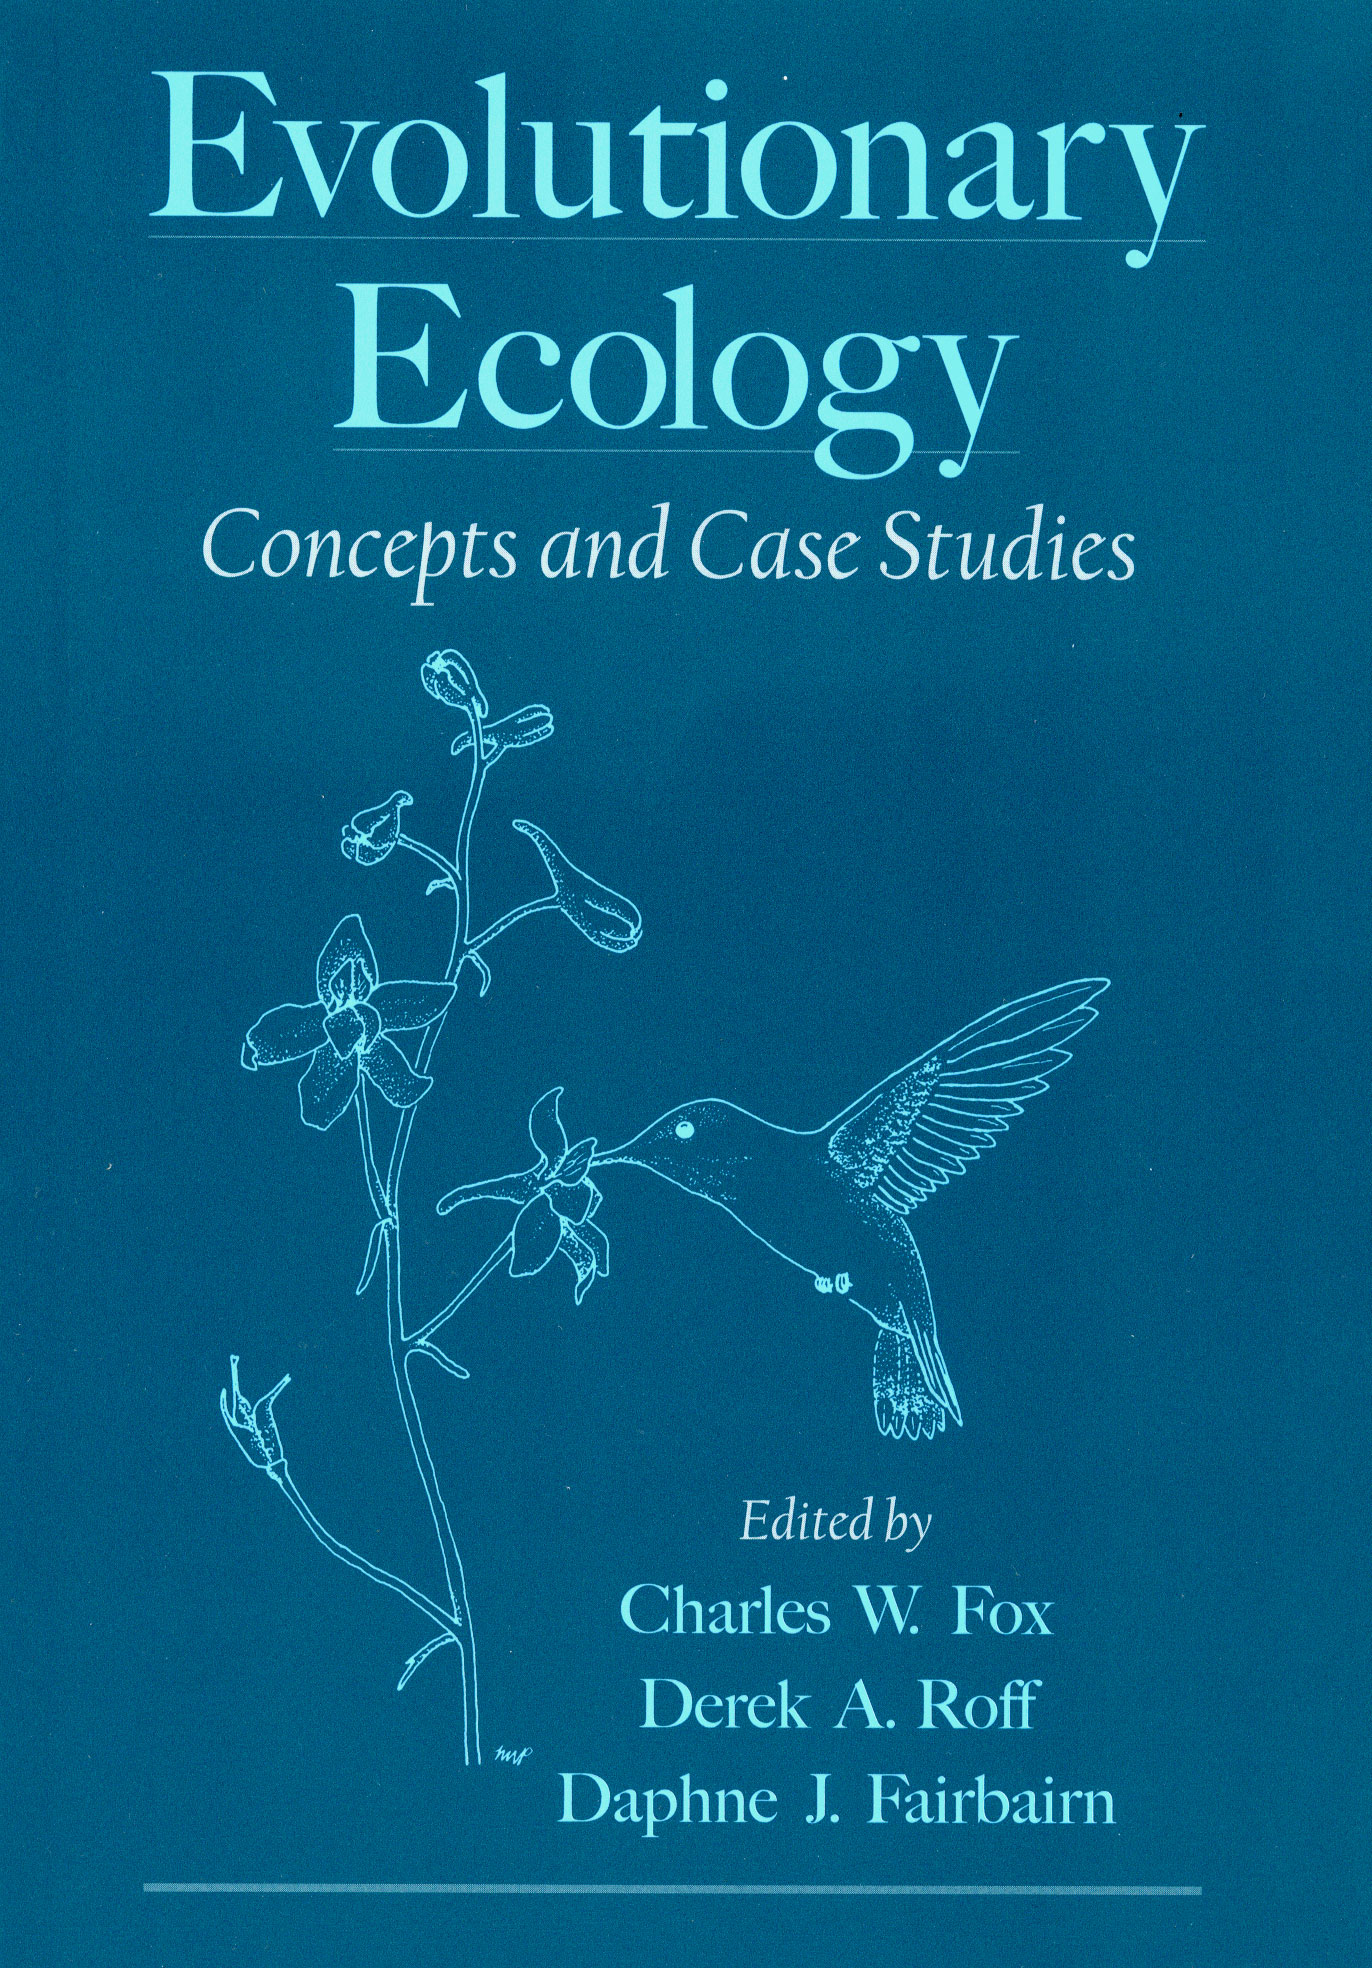 Ecology and evolution jobs wiki 2012